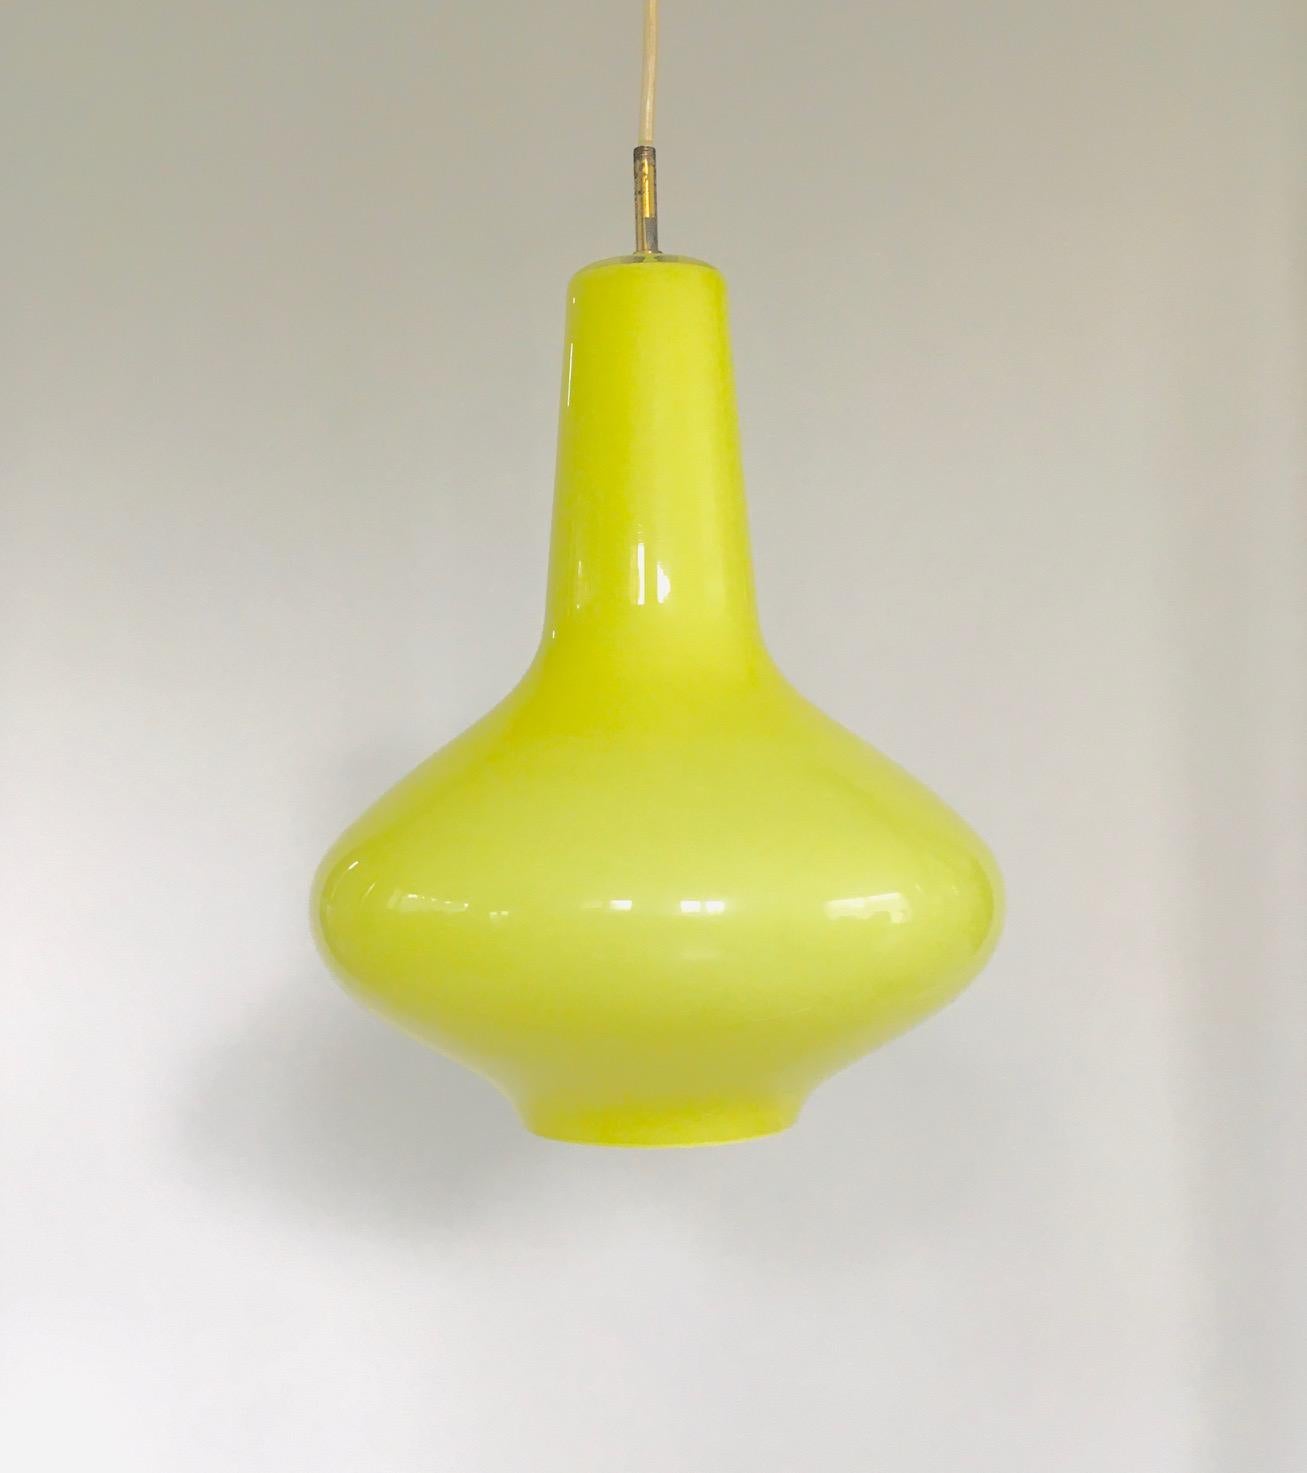 Vintage Midcentury Modern Design Yellow Opaline Glass Pendant lamp designed by Massimo Vignelli for Venini, Murano, Italy 1950's. Handblown opaline Venini glass. It has a lime yellow coloured glass with all the original parts. The wires have been